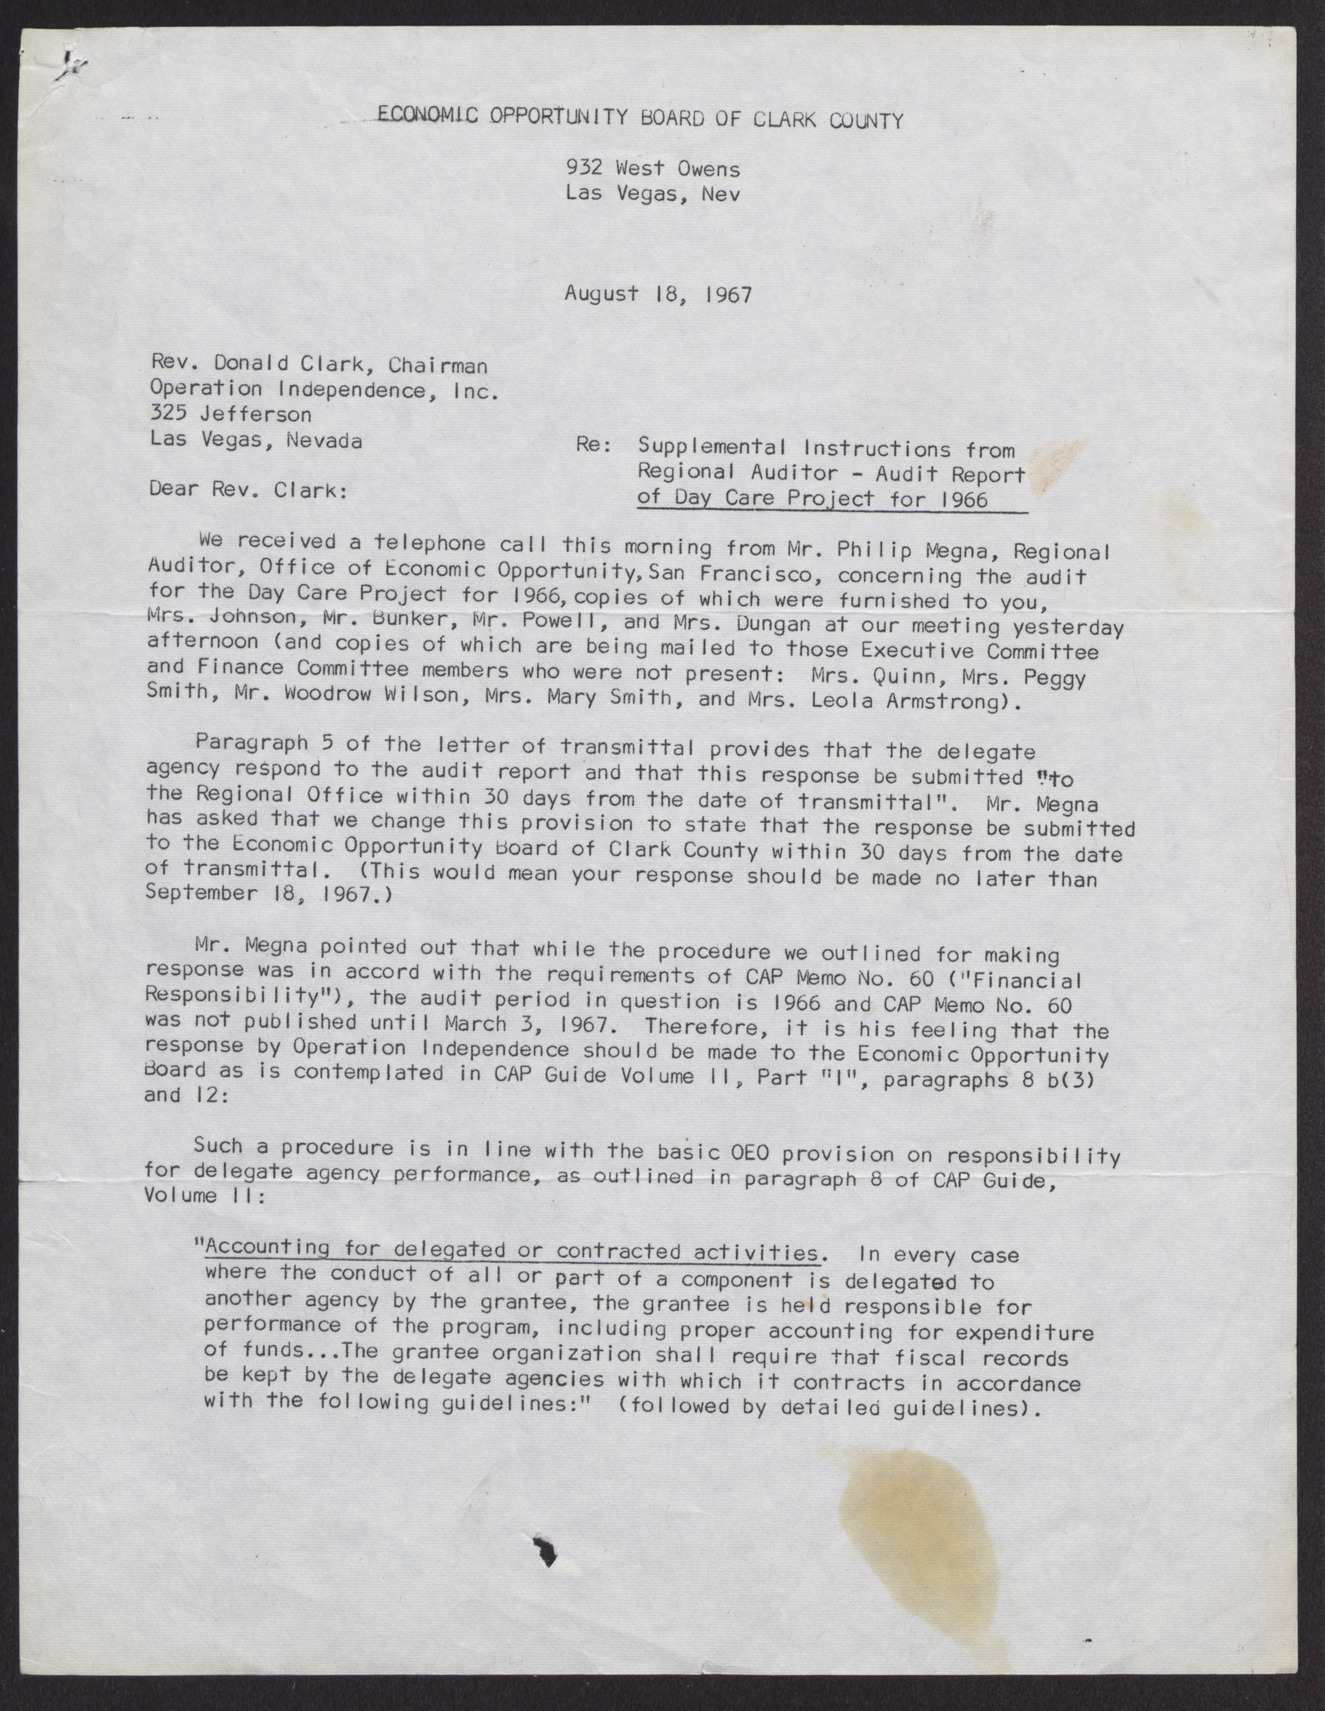 Letter to Rev. Donald Clark from the EOB, August 18, 1967